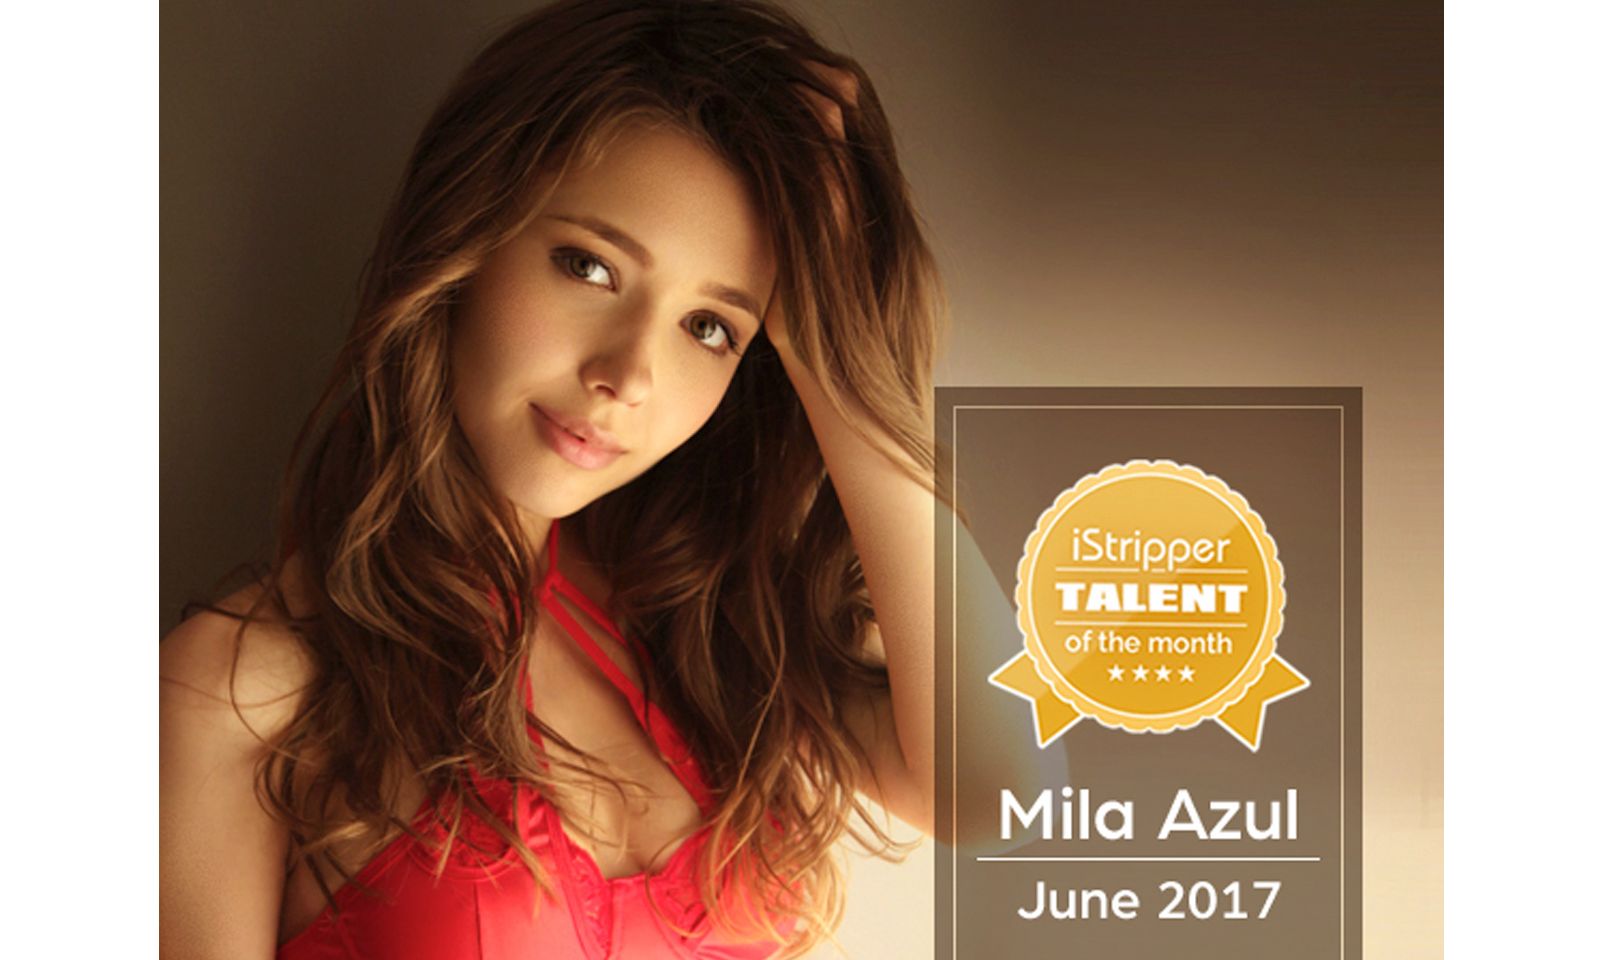 iStripper Debuts Talent of the Month, Mila Azul Named 1st Winner